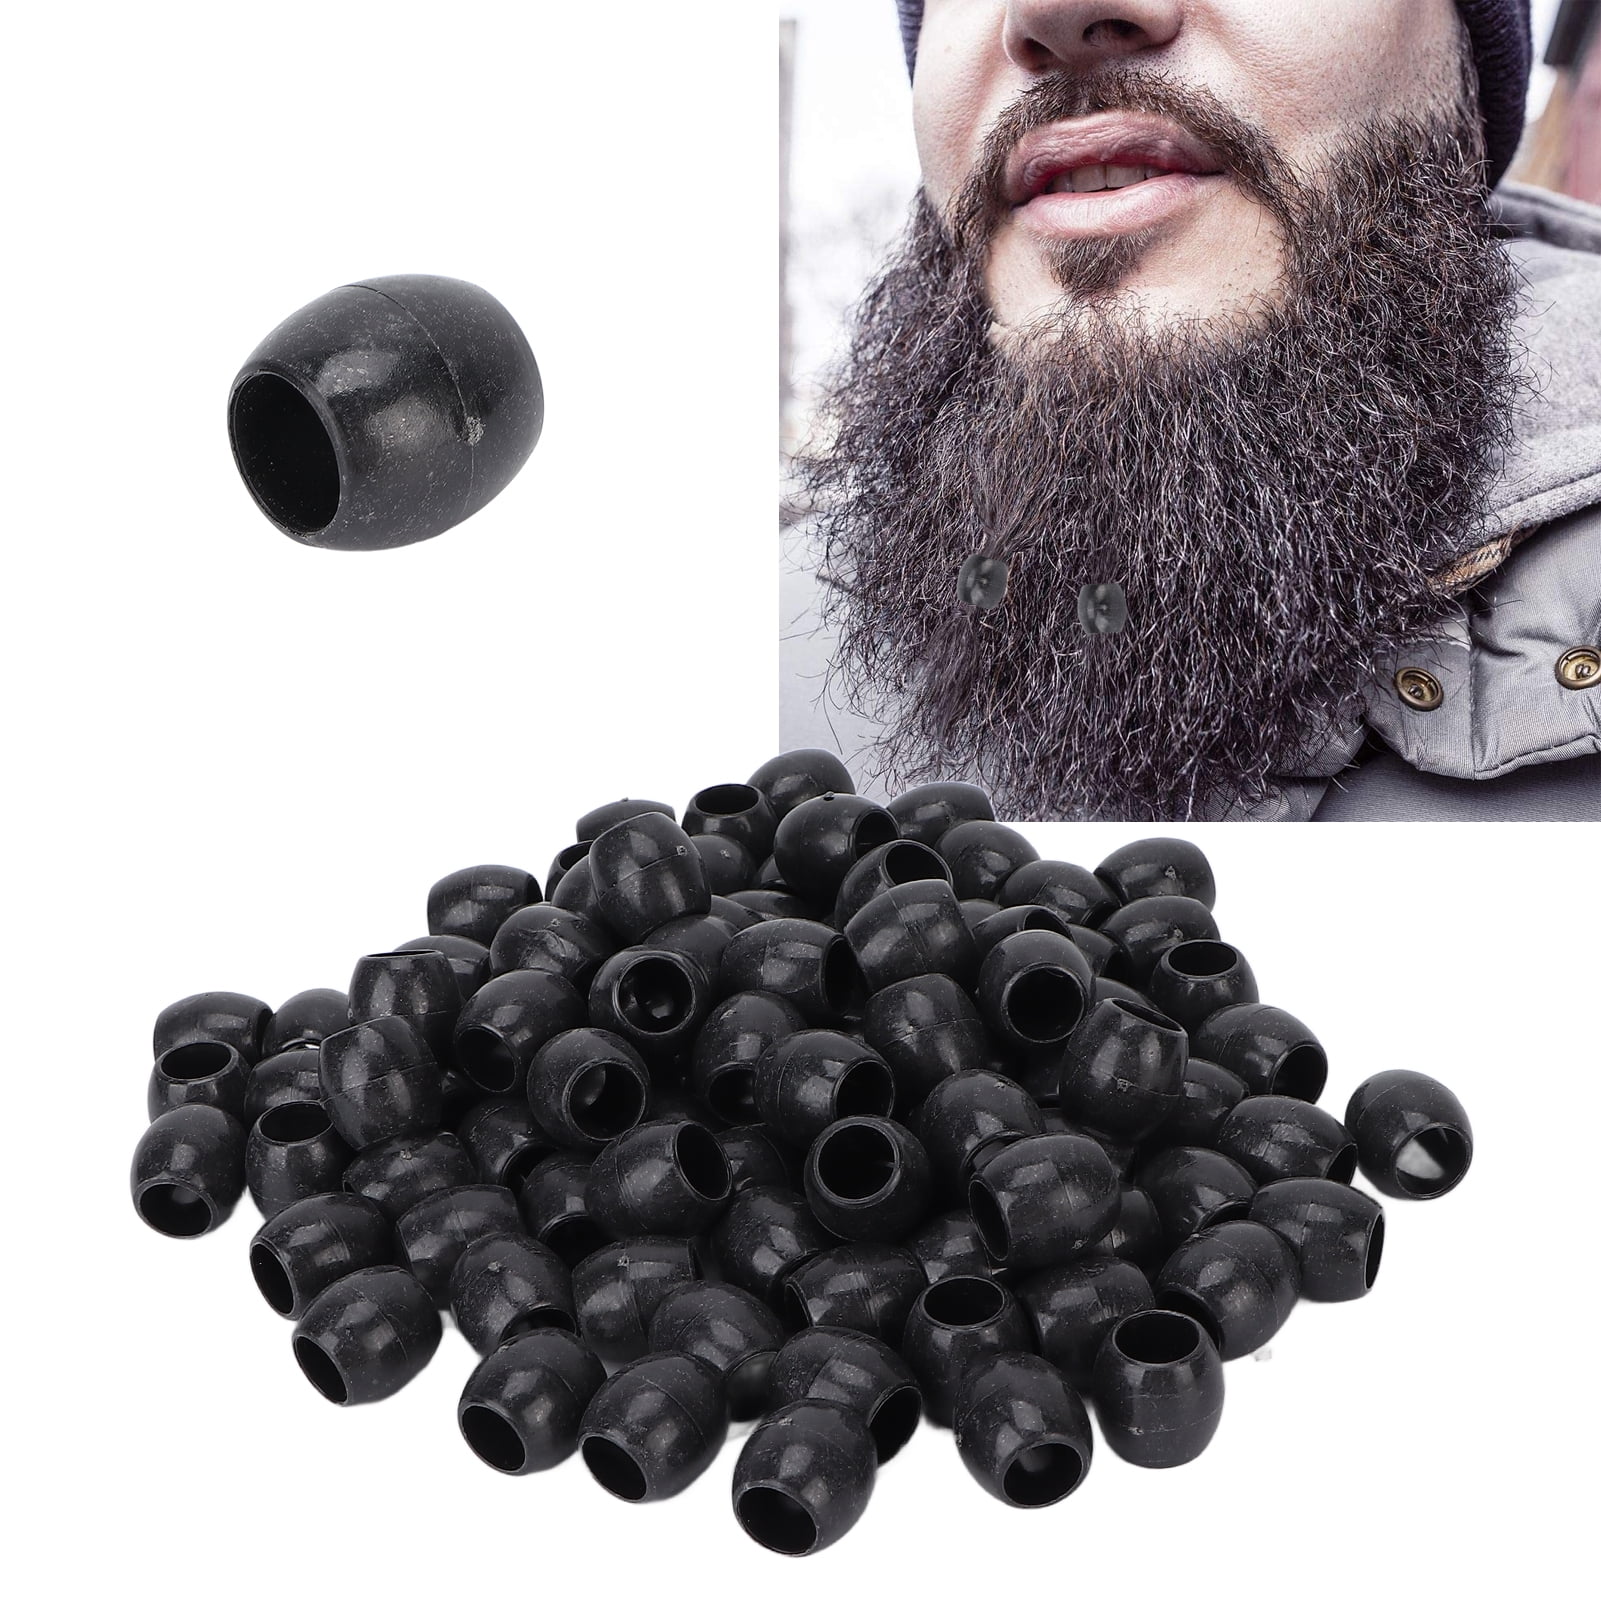  YOUTHINK Hair Accessories,10PCS Viking Beard Beads Alloy  Antique Norse Dreadlock Beads for Beard Hair DIY Bracelet Necklace : Beauty  & Personal Care